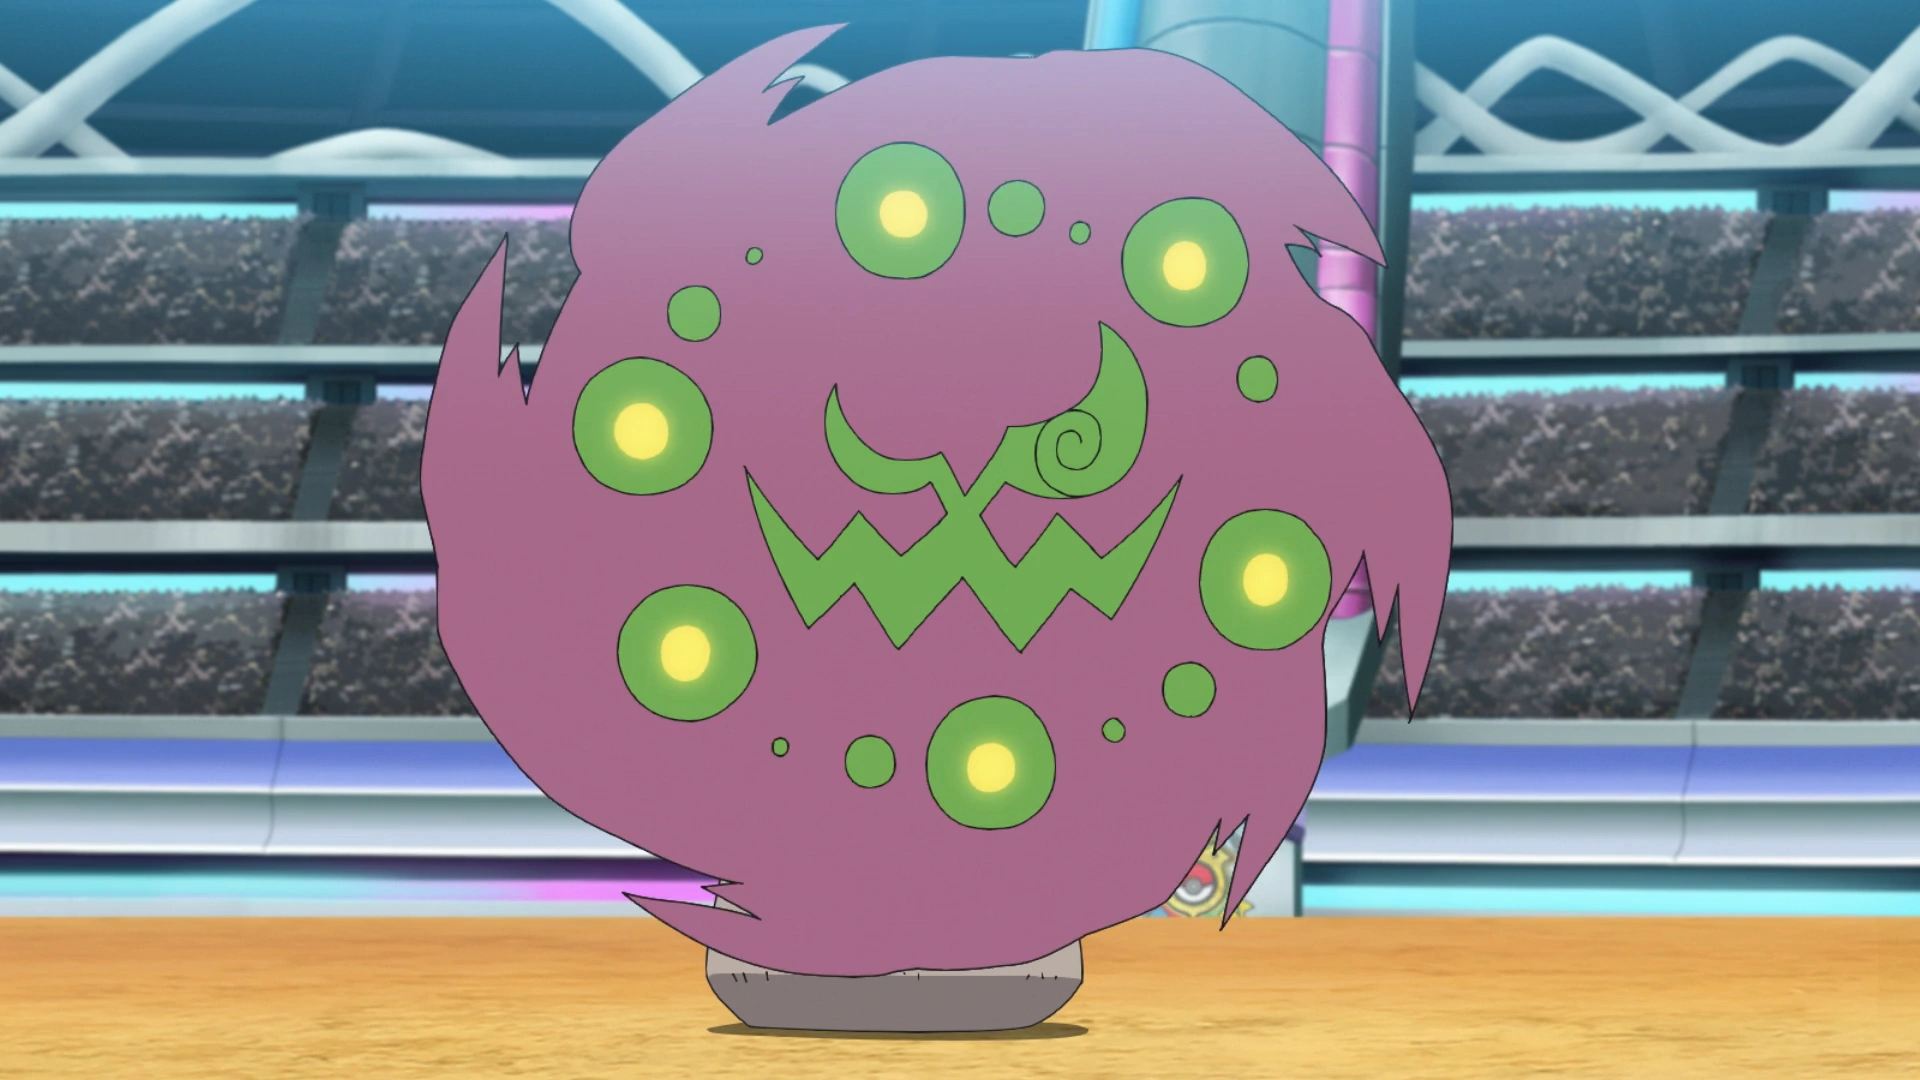 Precisely where can Spiritomb be found in Violet? - PokéBase